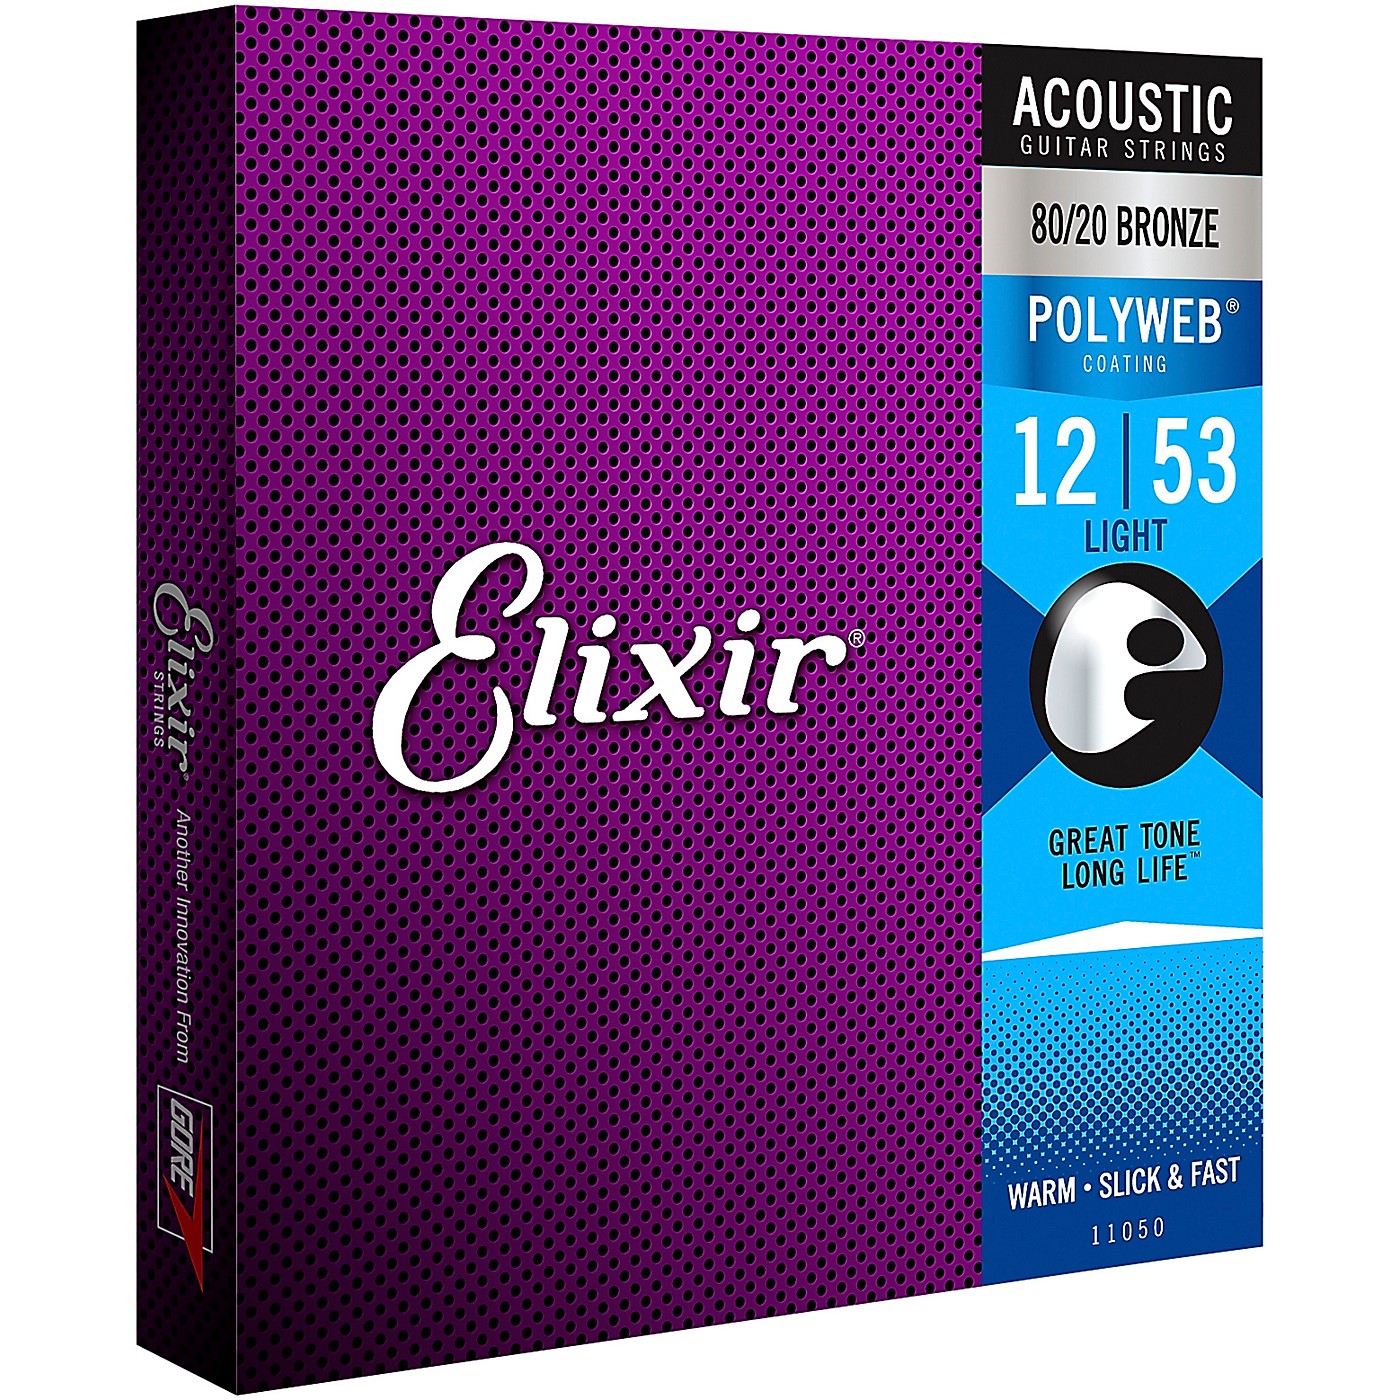 Elixir 80/20 Bronze Acoustic Guitar Strings with POLYWEB Coating, Light (.012-.053) thumbnail